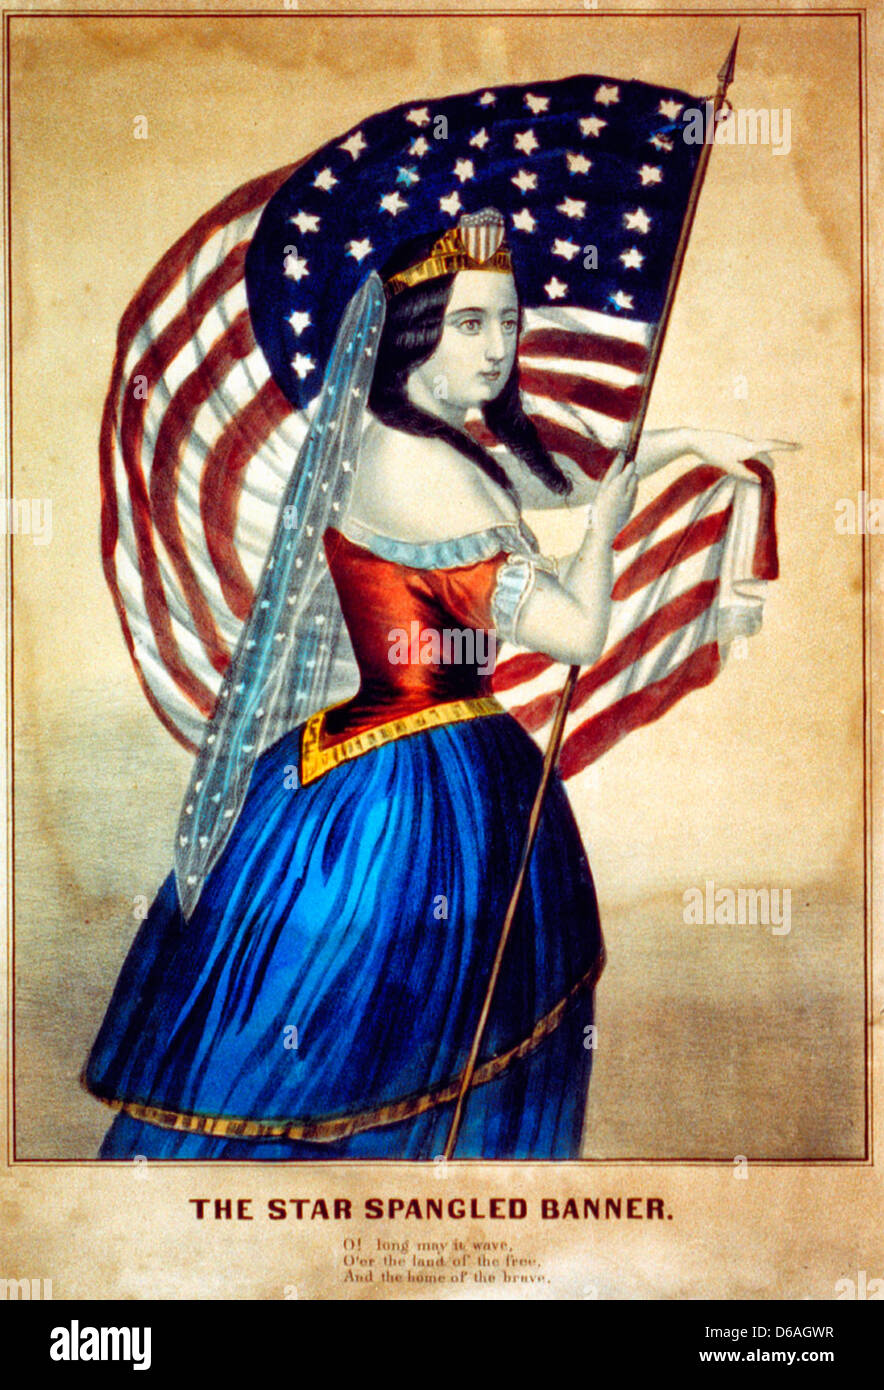 The Star Spangled Banner, lady, circa 1880 Stock Photo